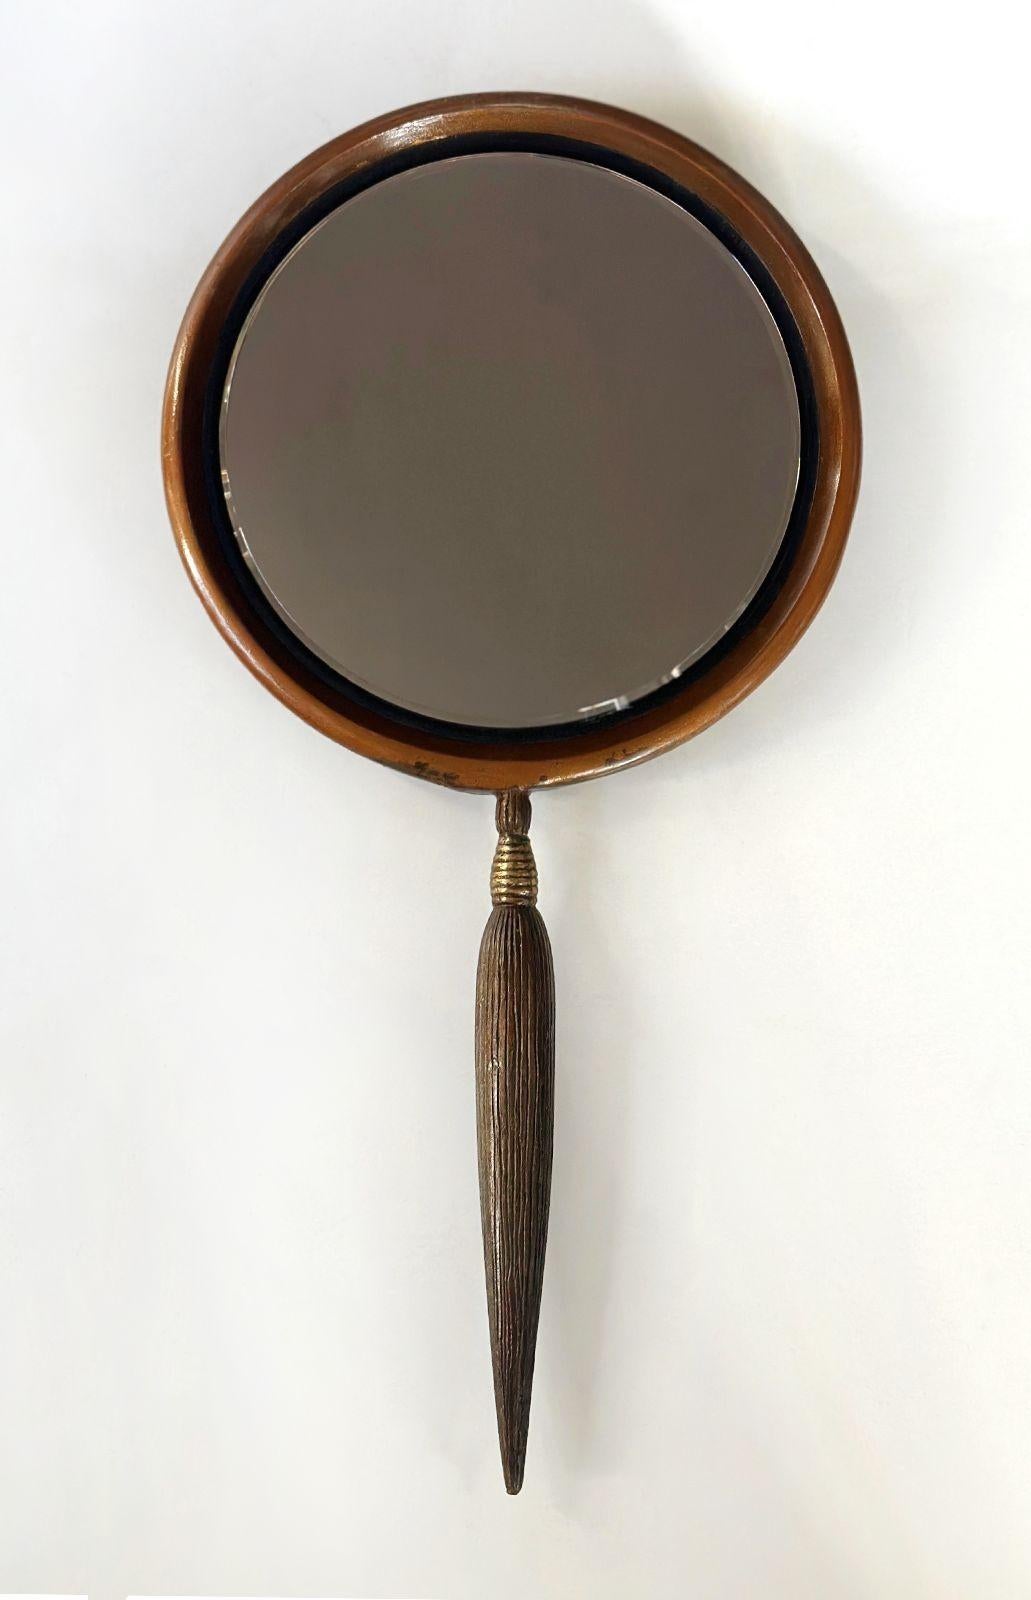 Original limited edition cold painted bronze hand mirror by Erté (Romain de Tirtoff). This mirror seamlessly embodies the essence of Erté's distinctive style. On the reverse side of the piece, a vision of 1930's haute couture emerges with a woman